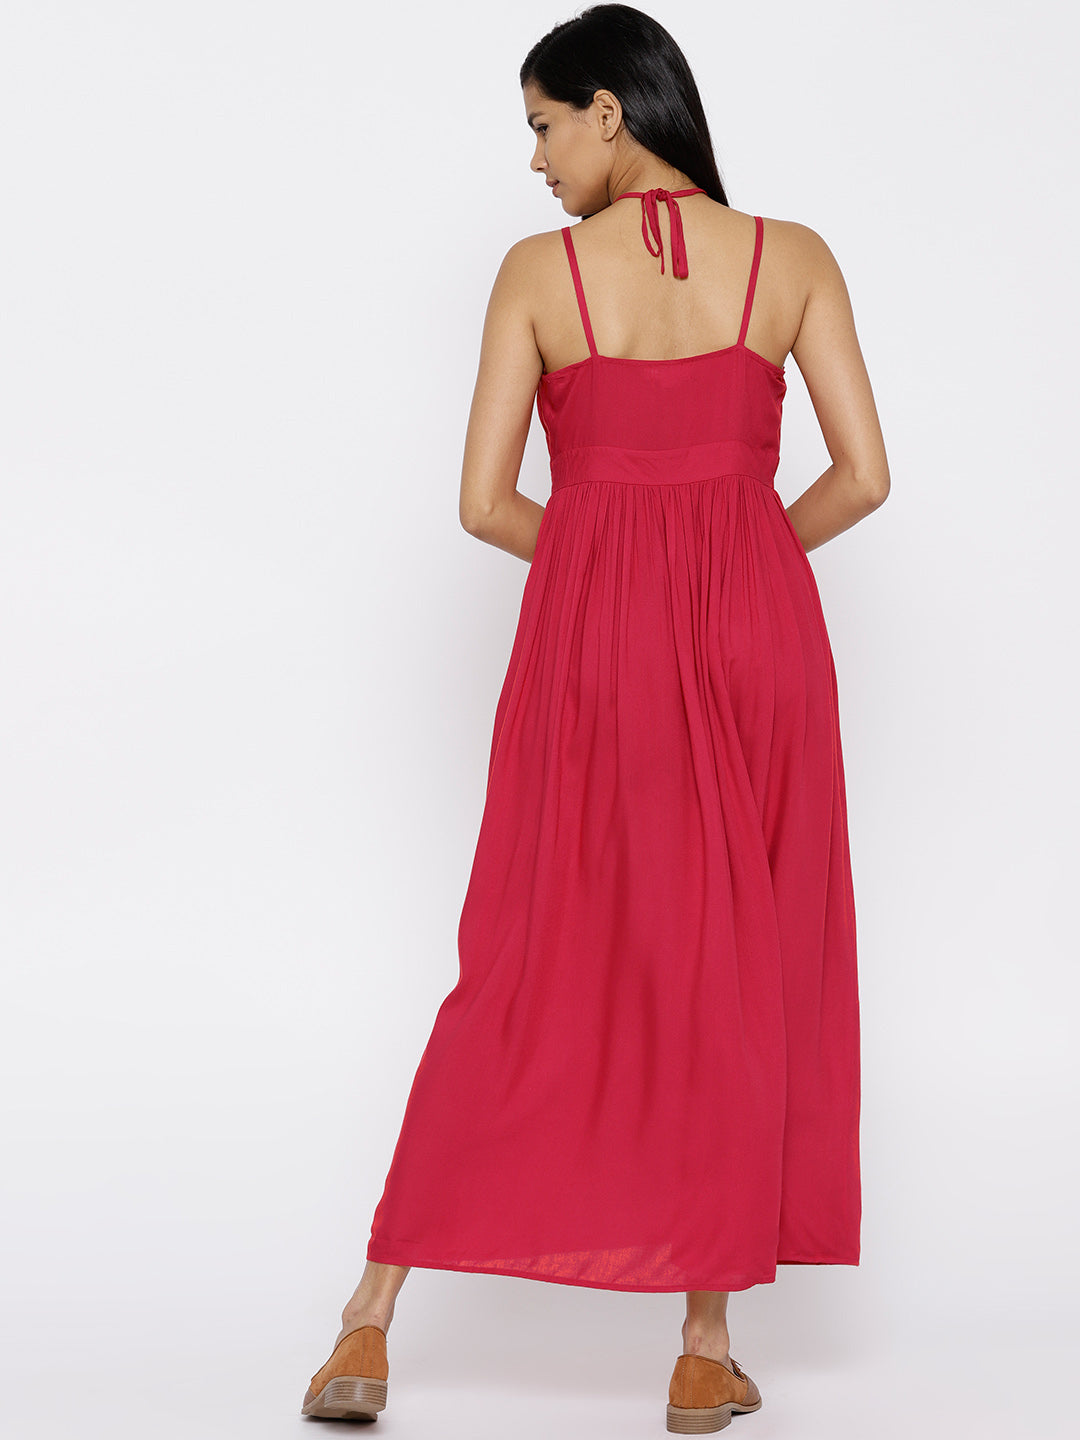 Long maxi dress with halter tie up